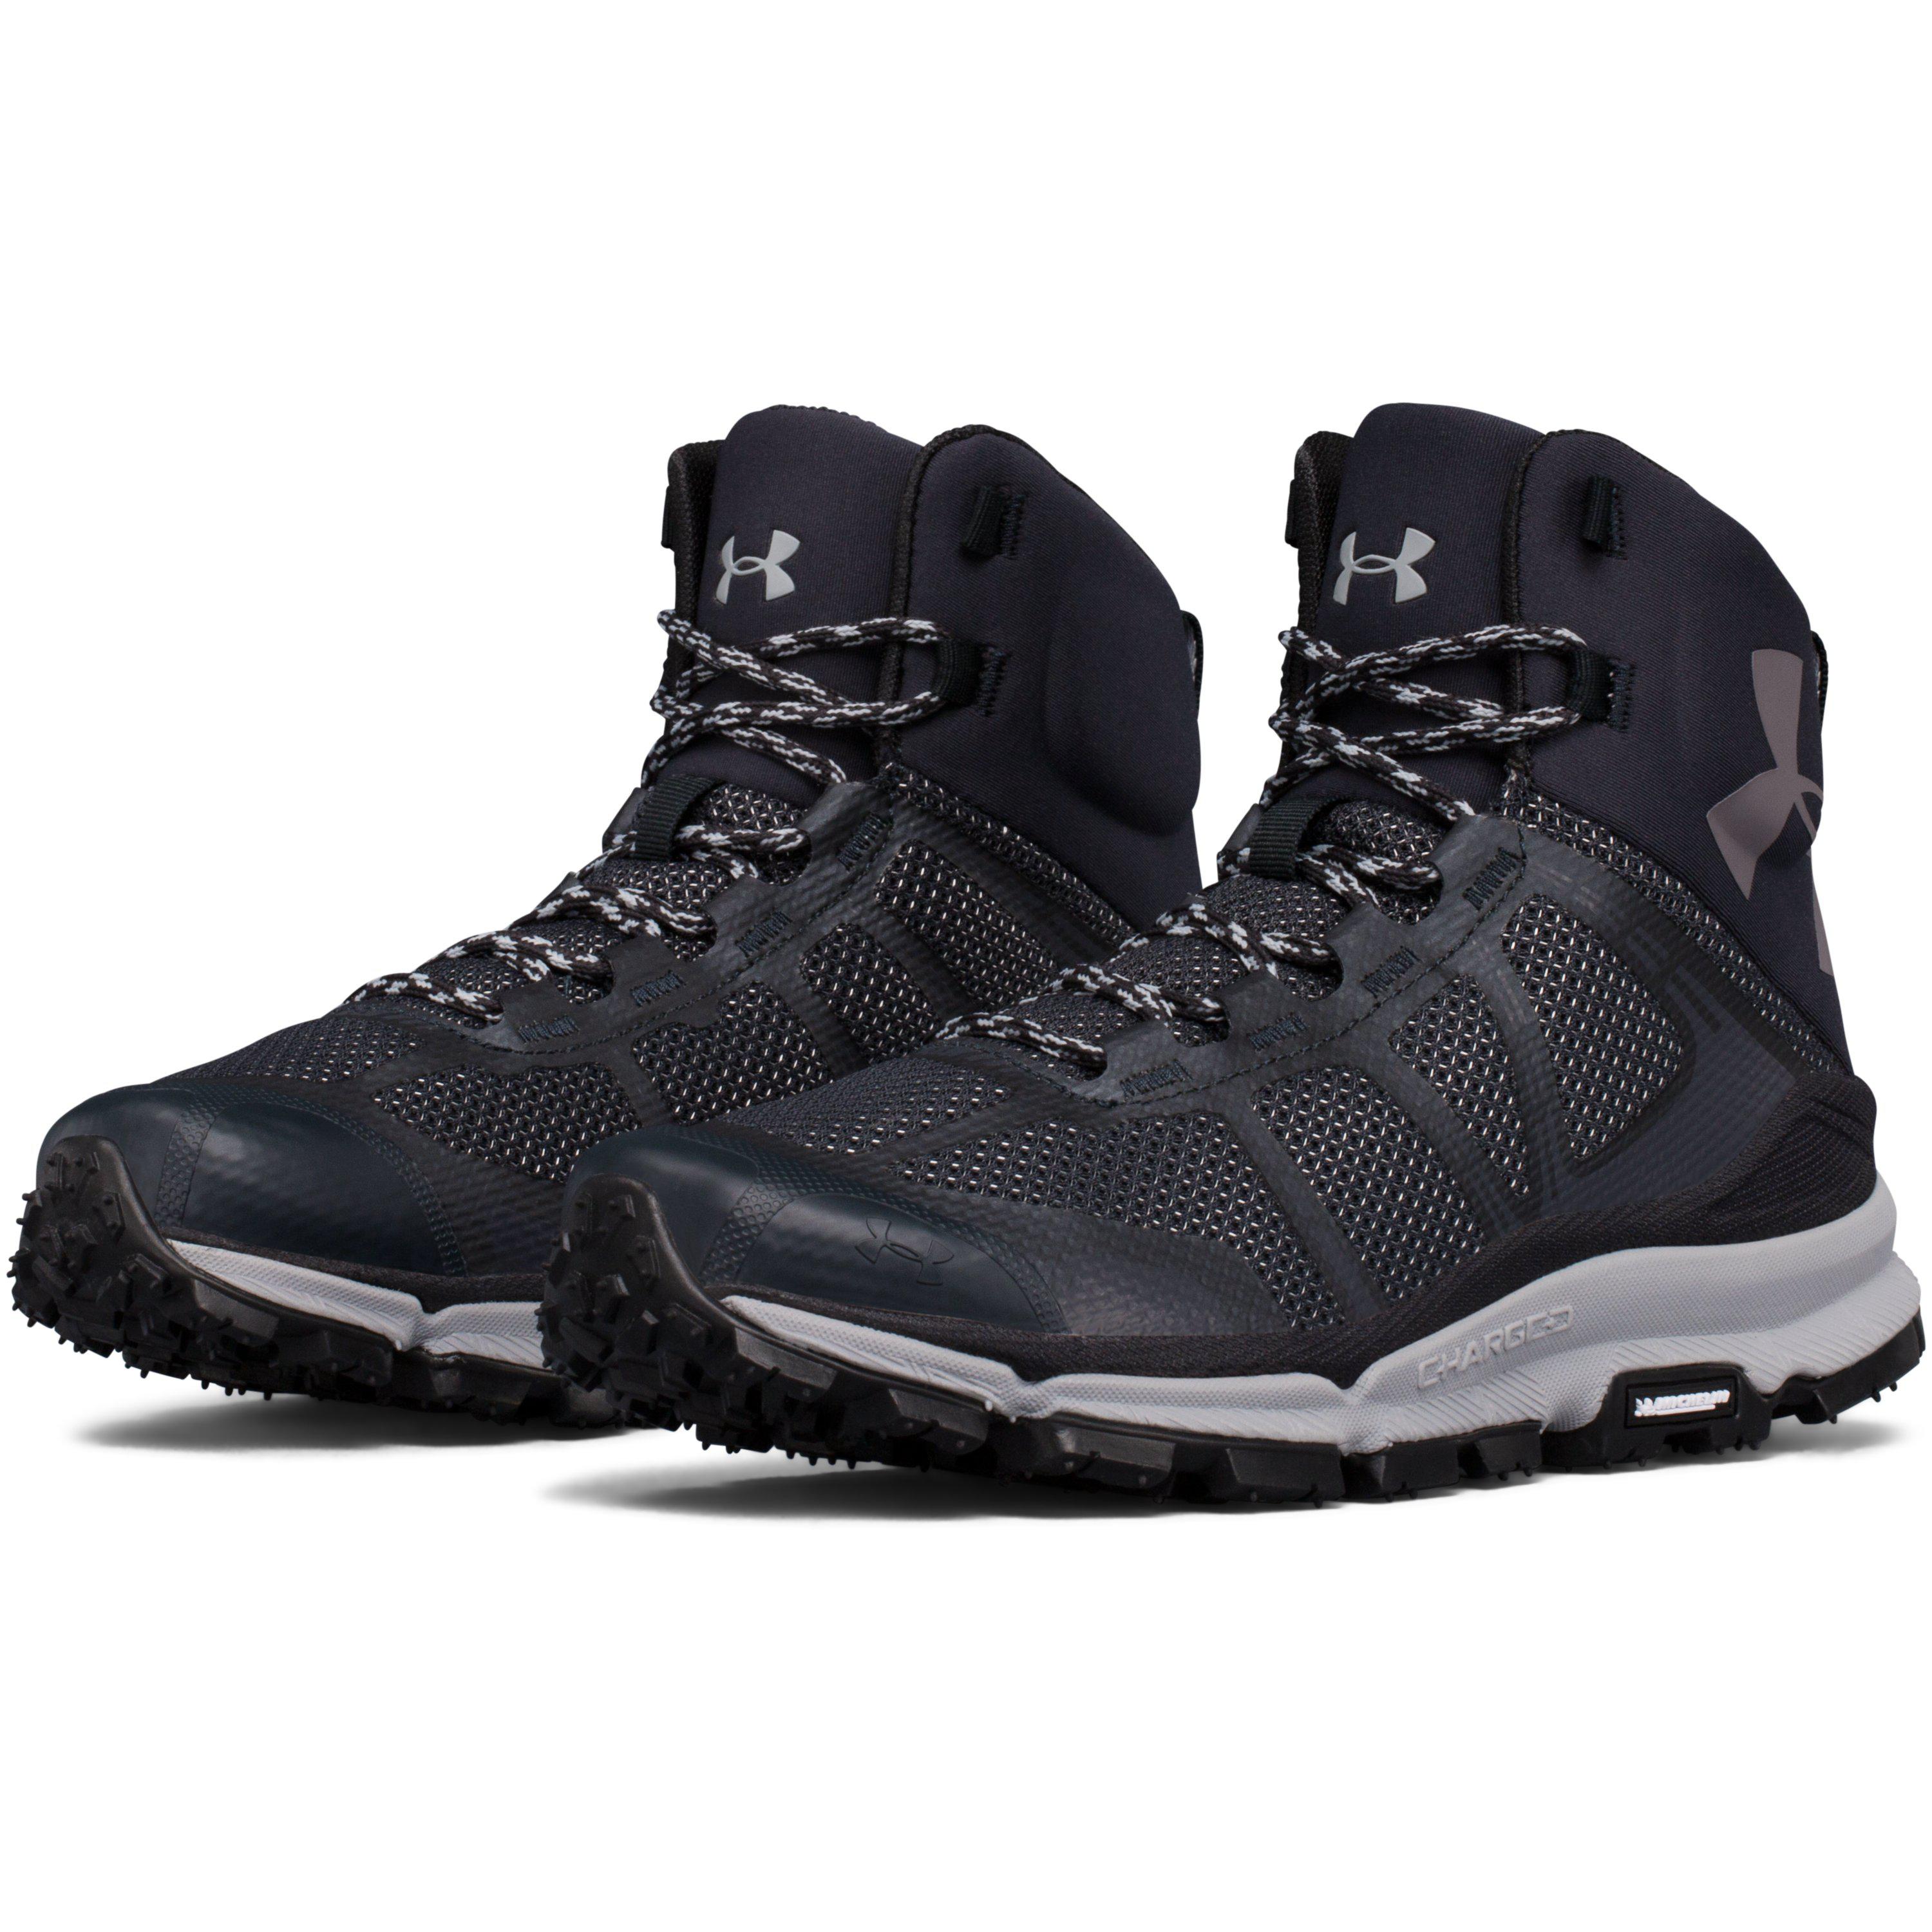 Under Armour Boots Womens - almoire